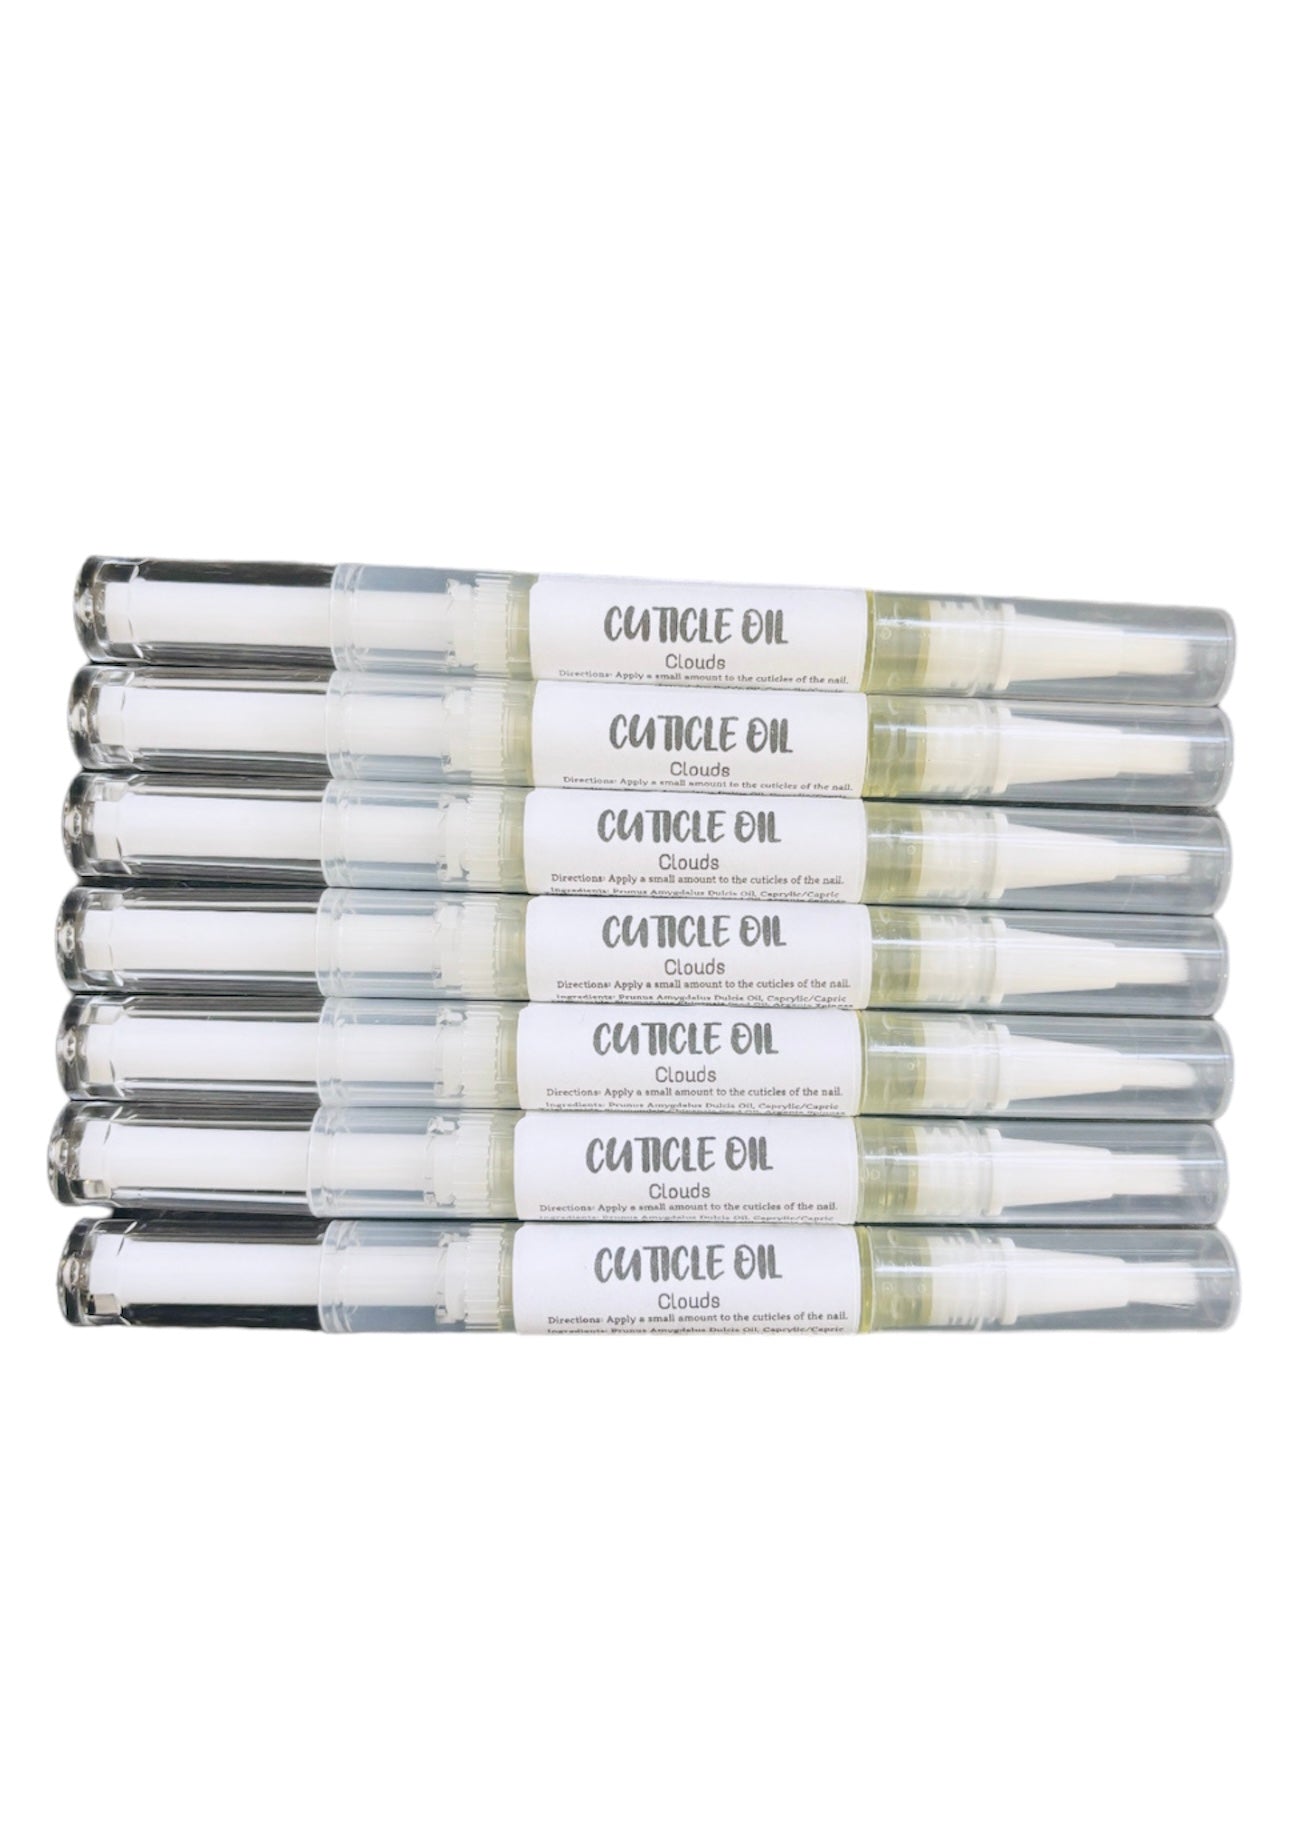 Perfume/Aftershave Cuticle Oil 3ml Pens